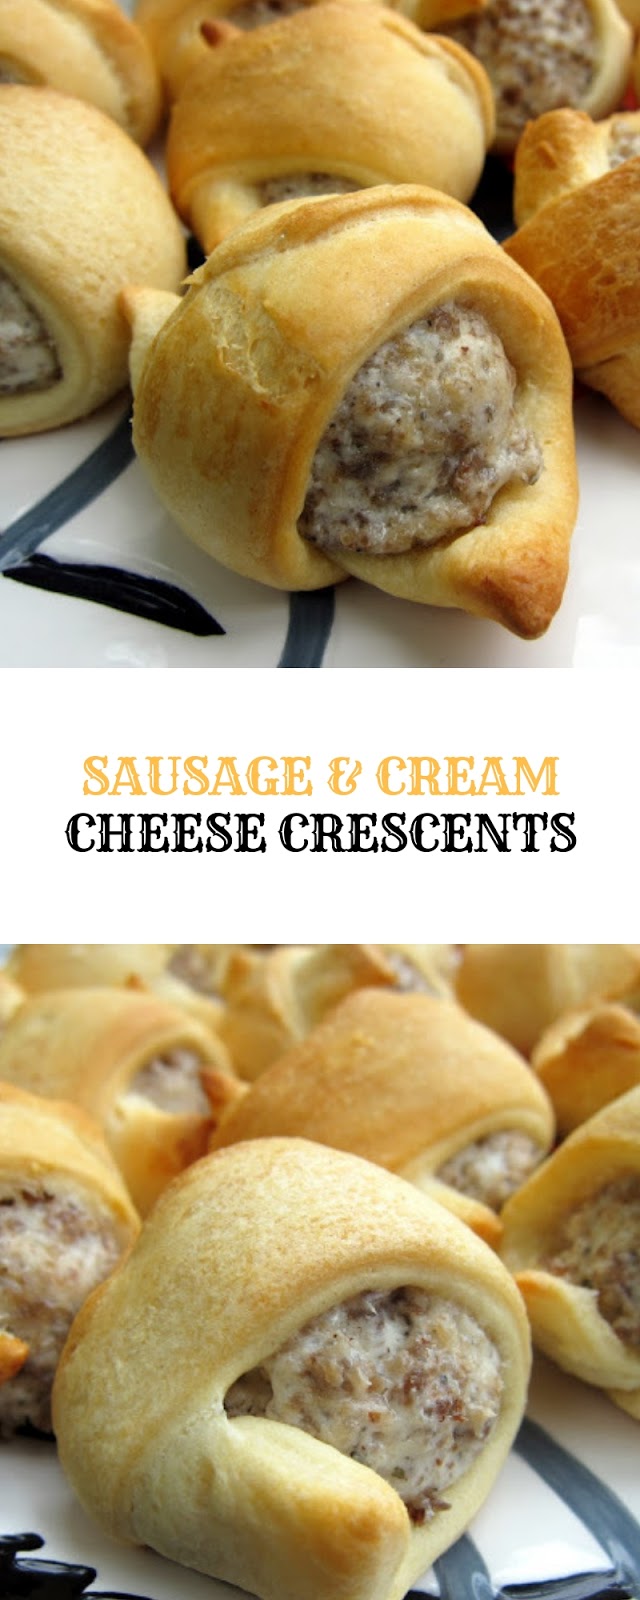 Sausage & Cream Cheese Crescents | Delicious My Food